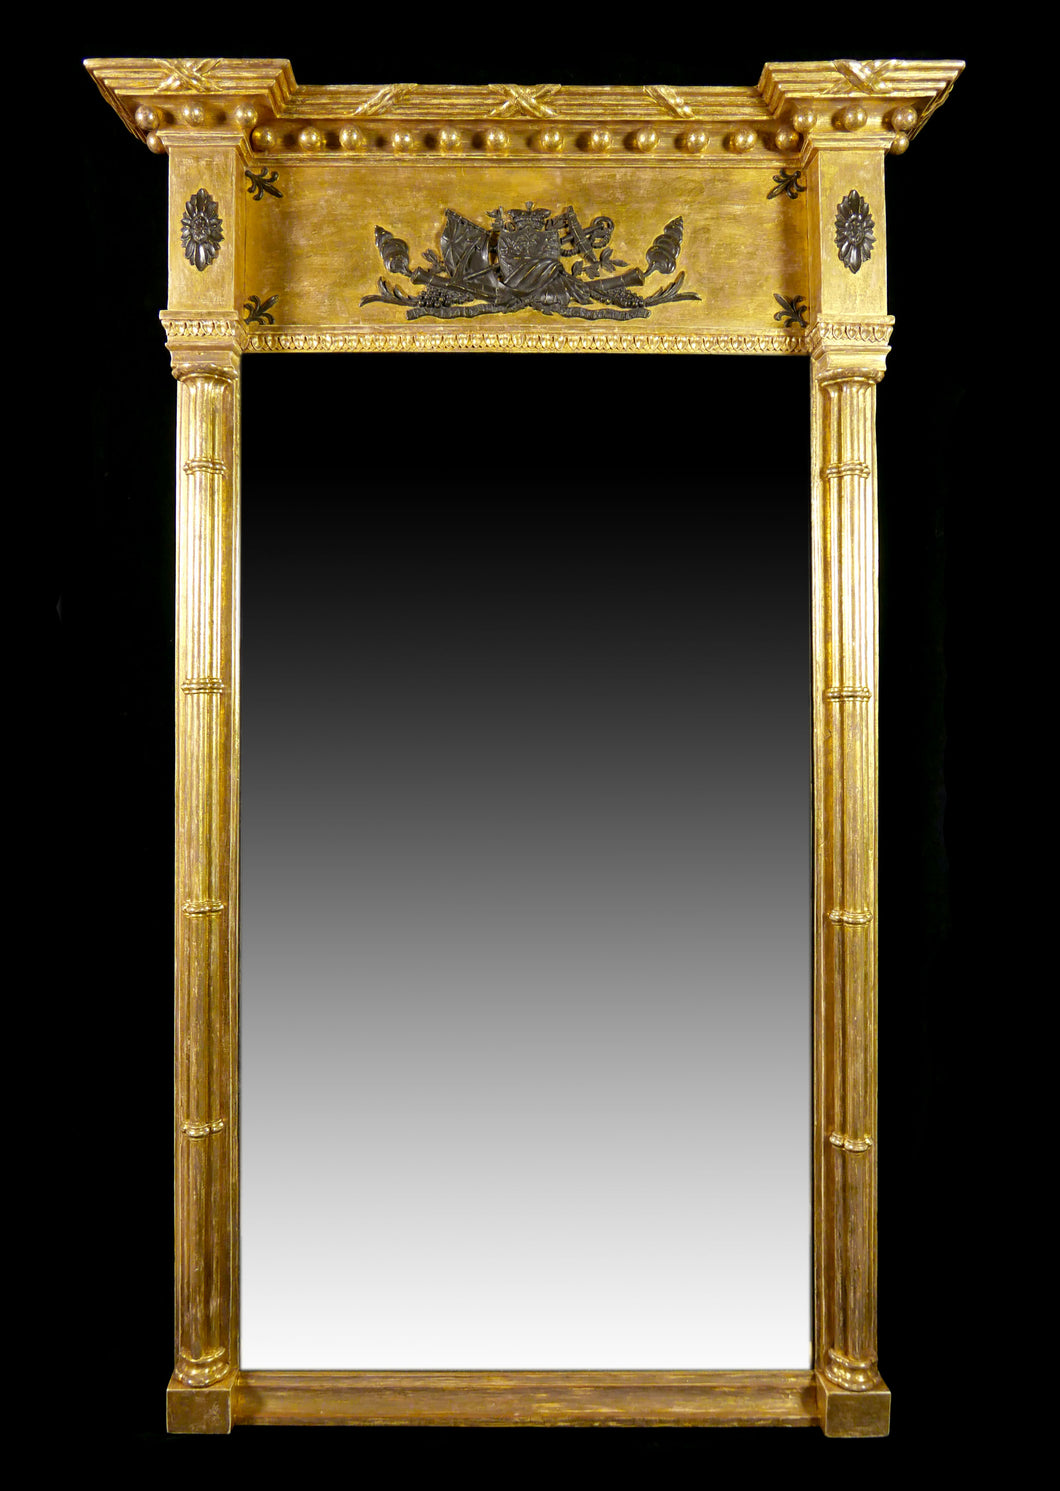 Admiral Lord Nelson - A George III Gilt Wood Pier Glass, 1800